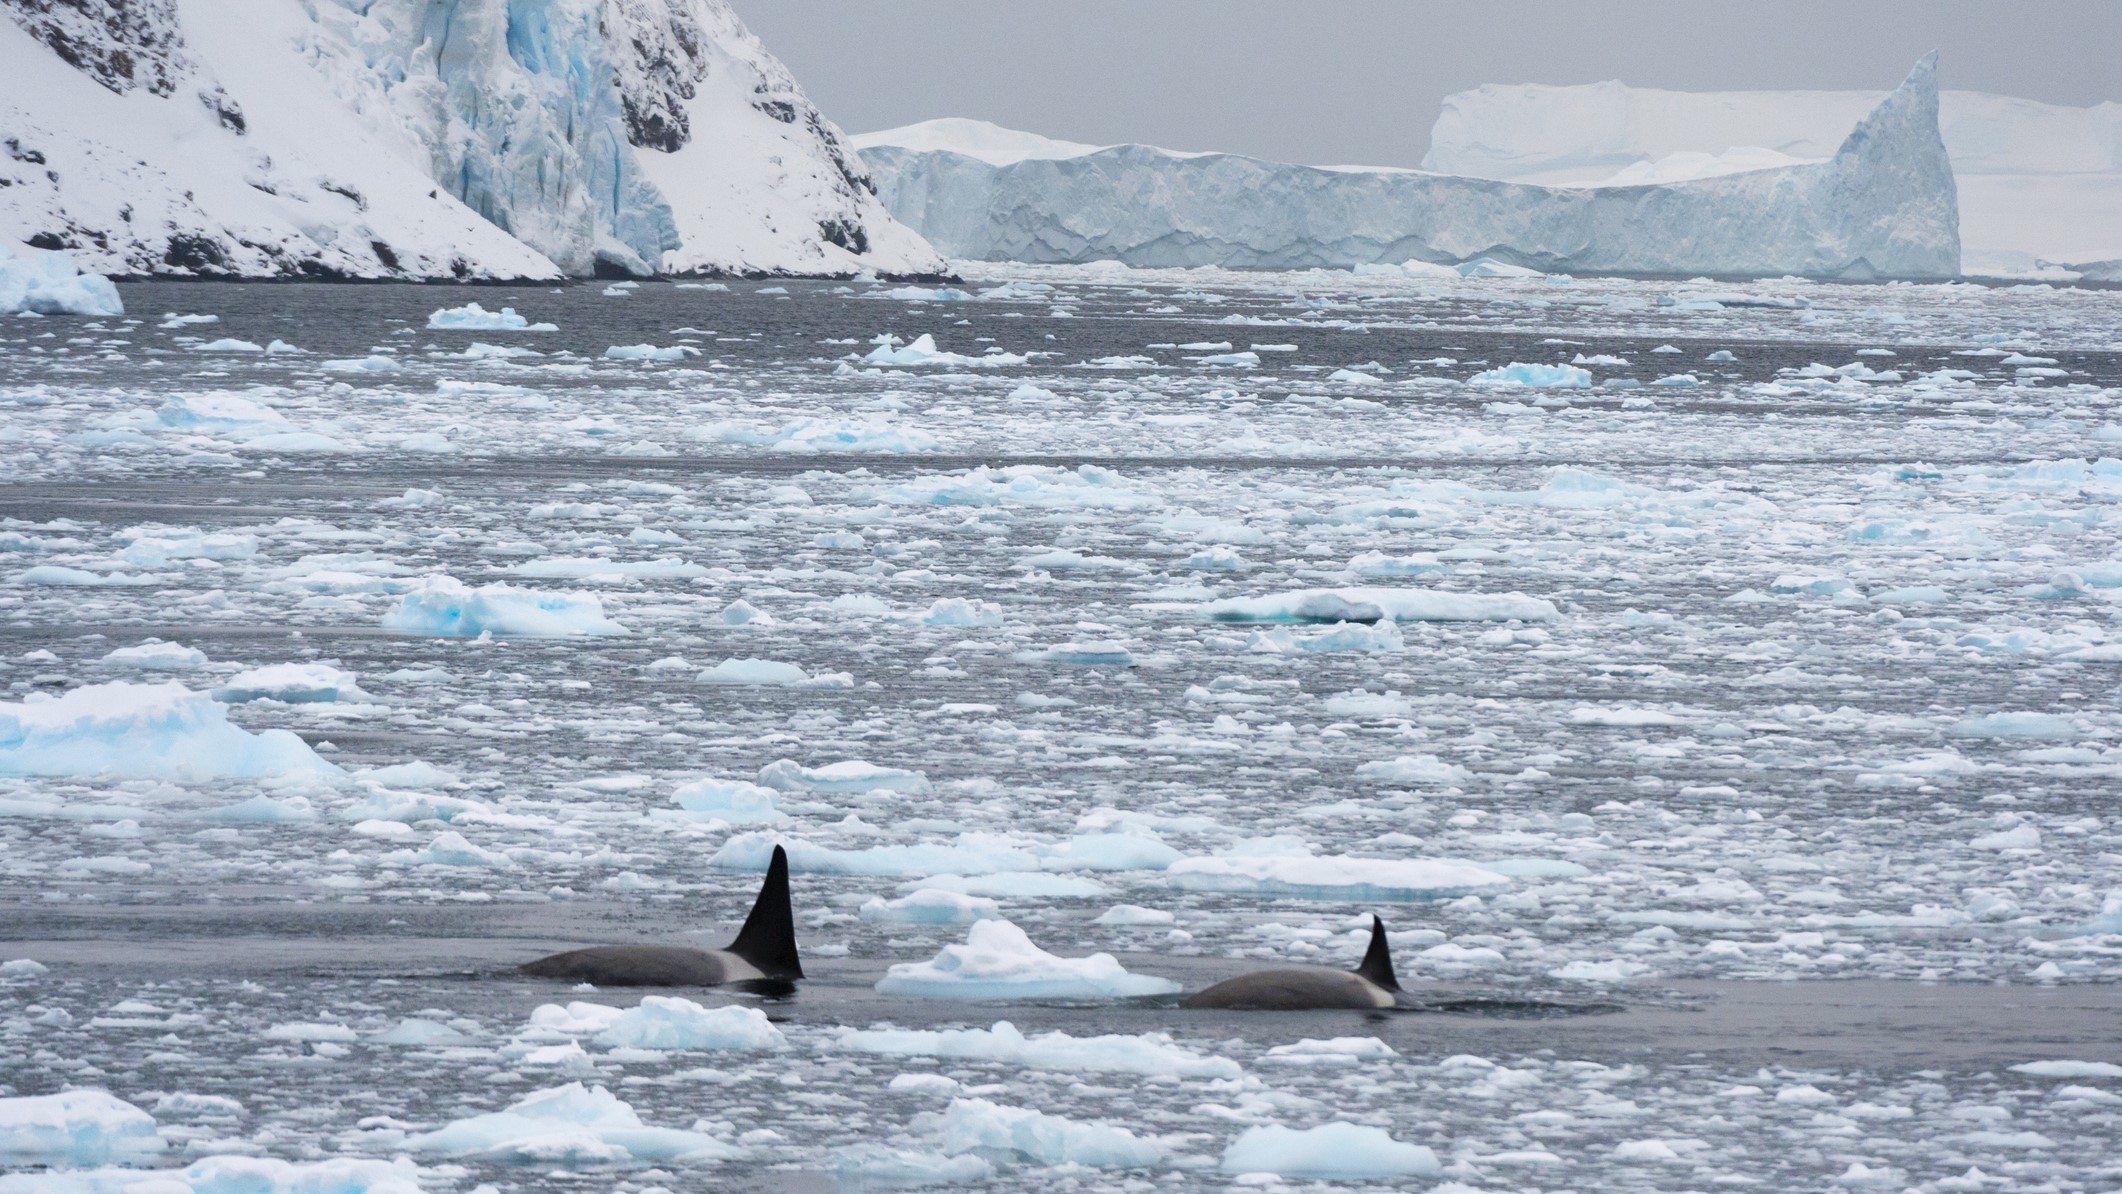 Two orcas swim among melting sea ice in Antarctica.